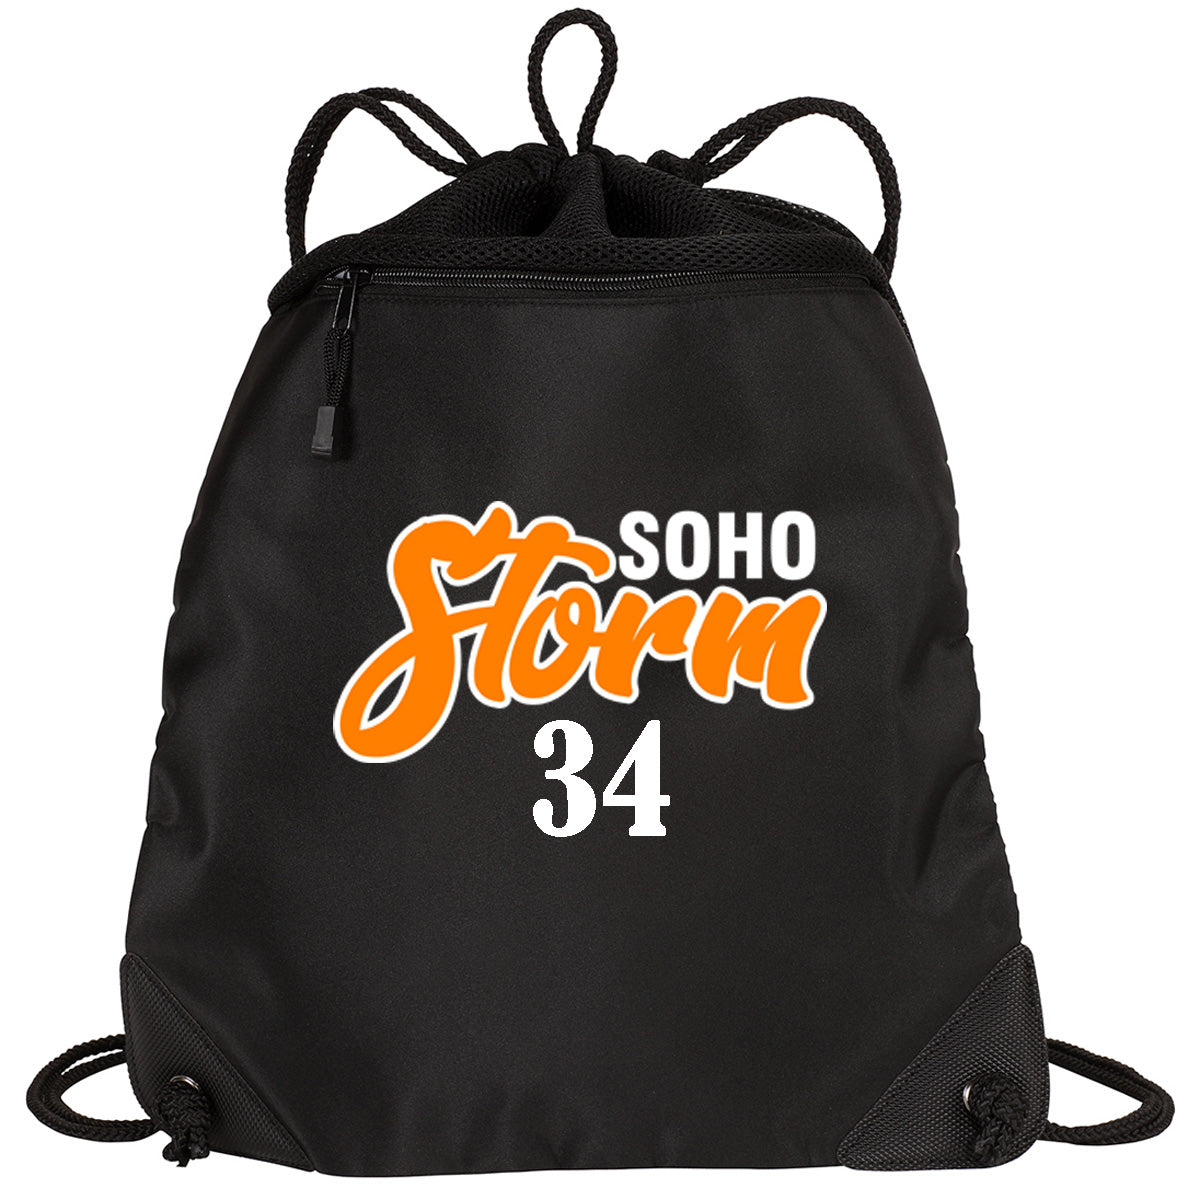 SOHO - Cinch Backpack with SOHO STORM (DOPESTYLE FONT) - Black (BG810) - Southern Grace Creations